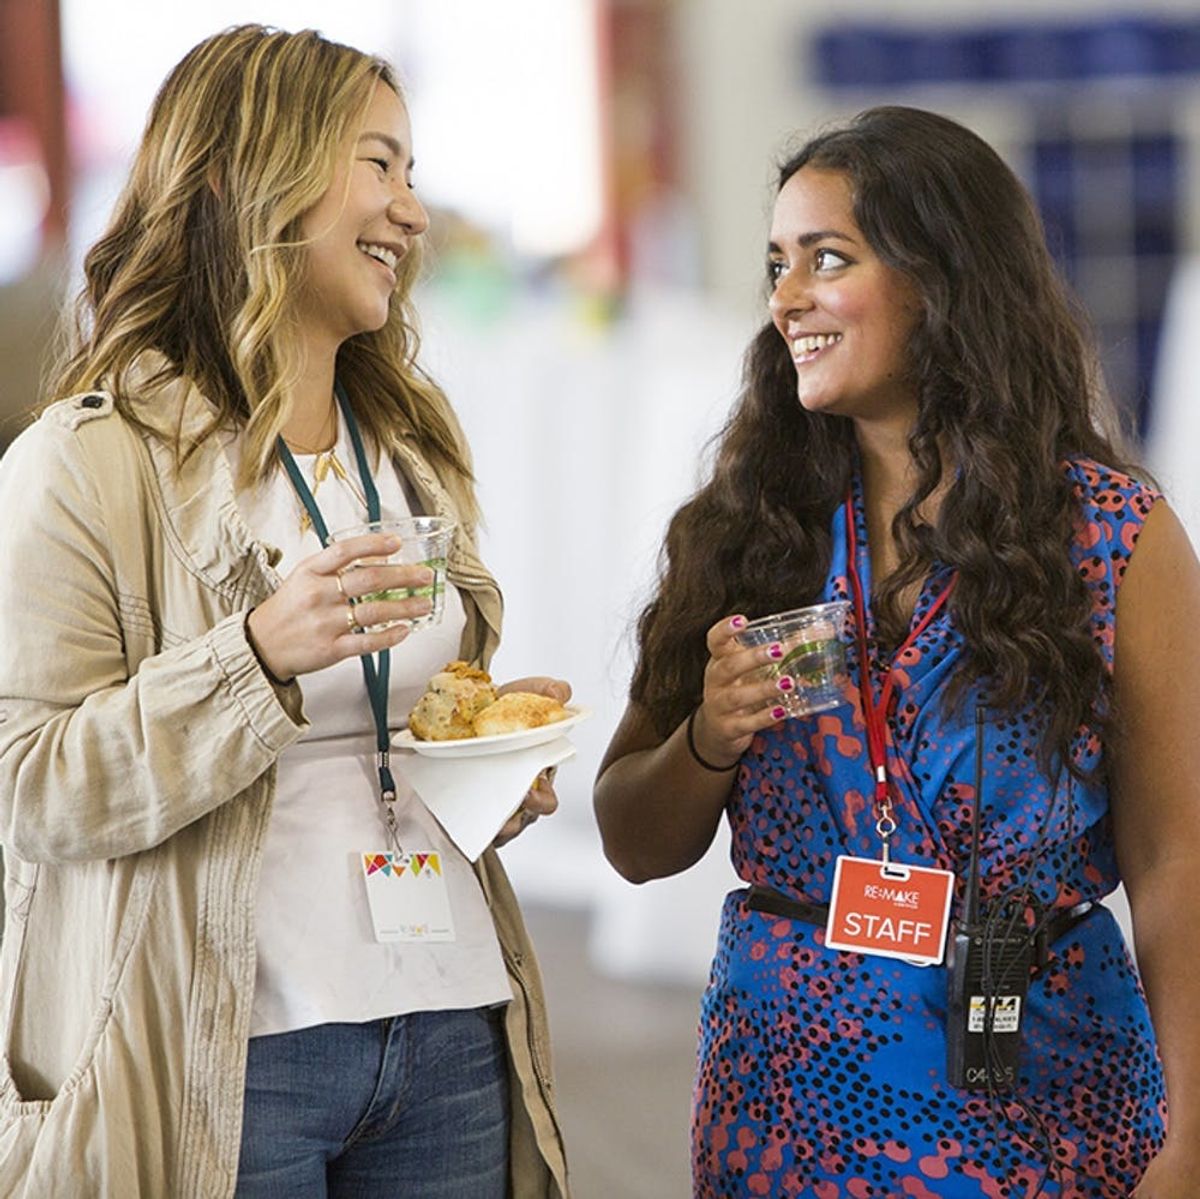 21 Non-Awkward Ways to Start a Networking Conversation With Anyone